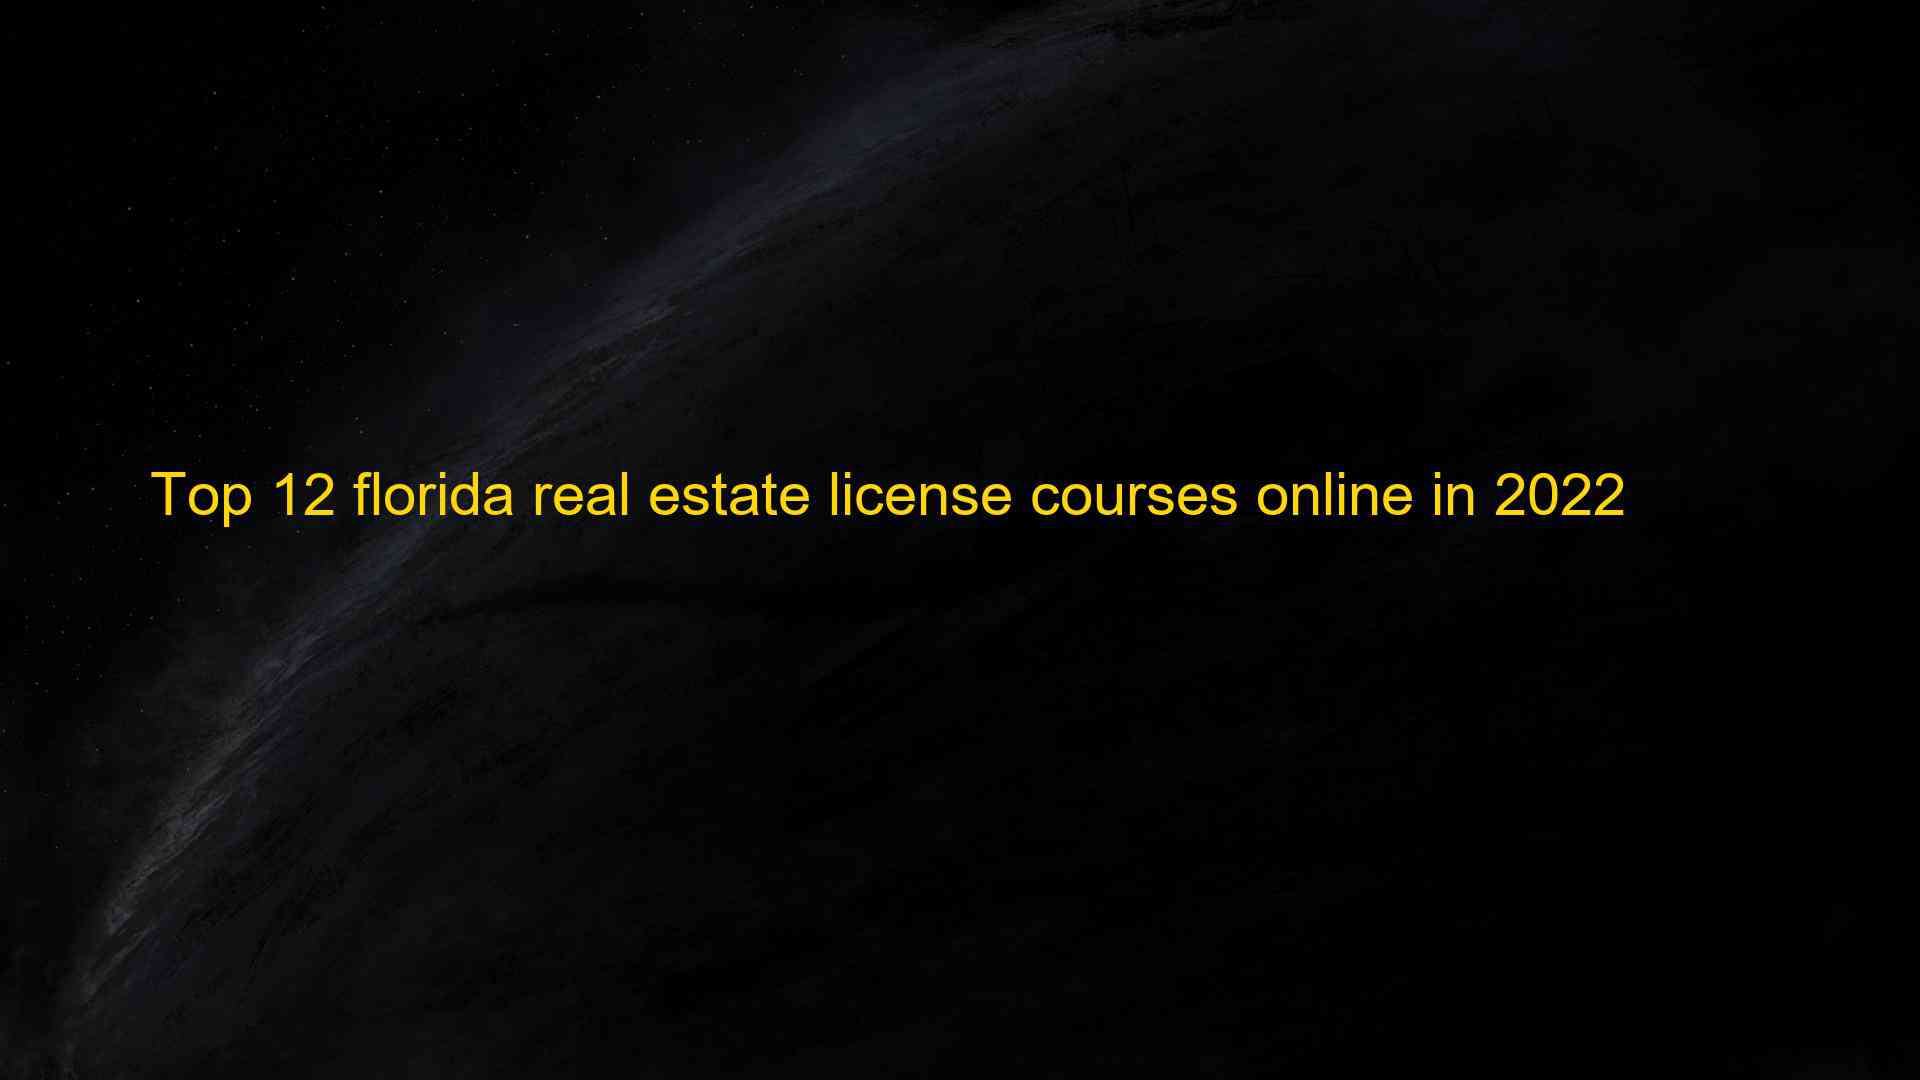 Top 12 florida real estate license courses online in 2022 1661838182